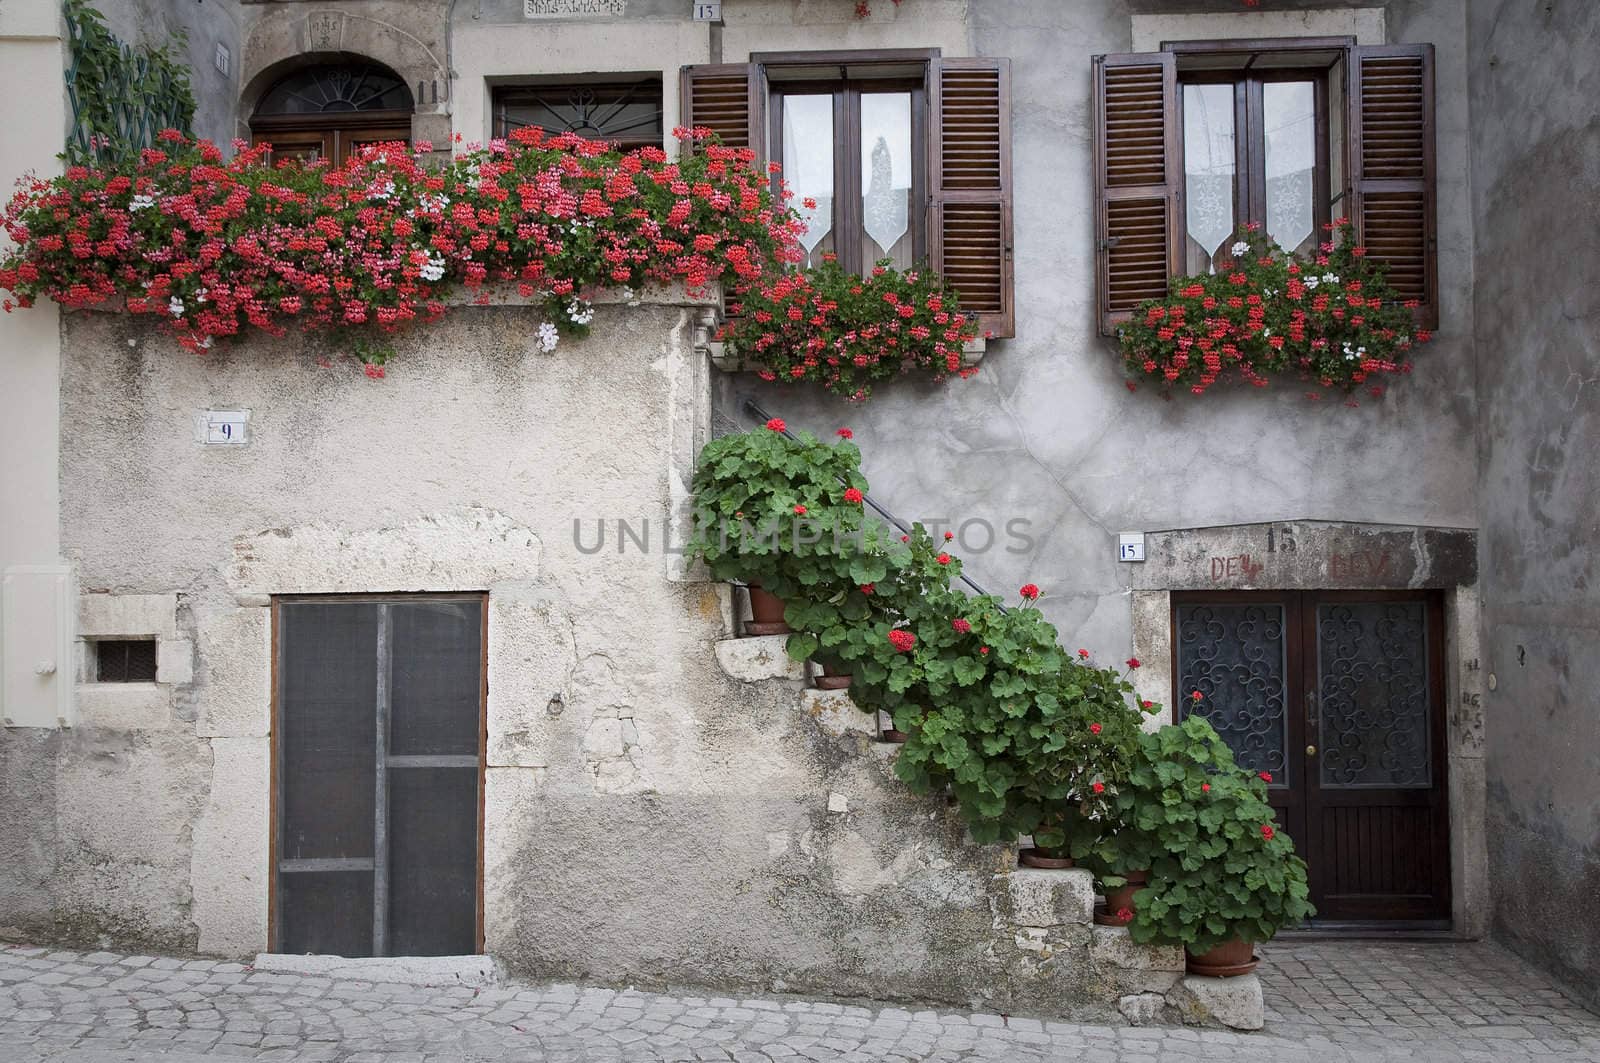 Lots of red geranium by the entrance of a home in the mountain village of Pescocostanzo, region of Abruzzo, Italy.